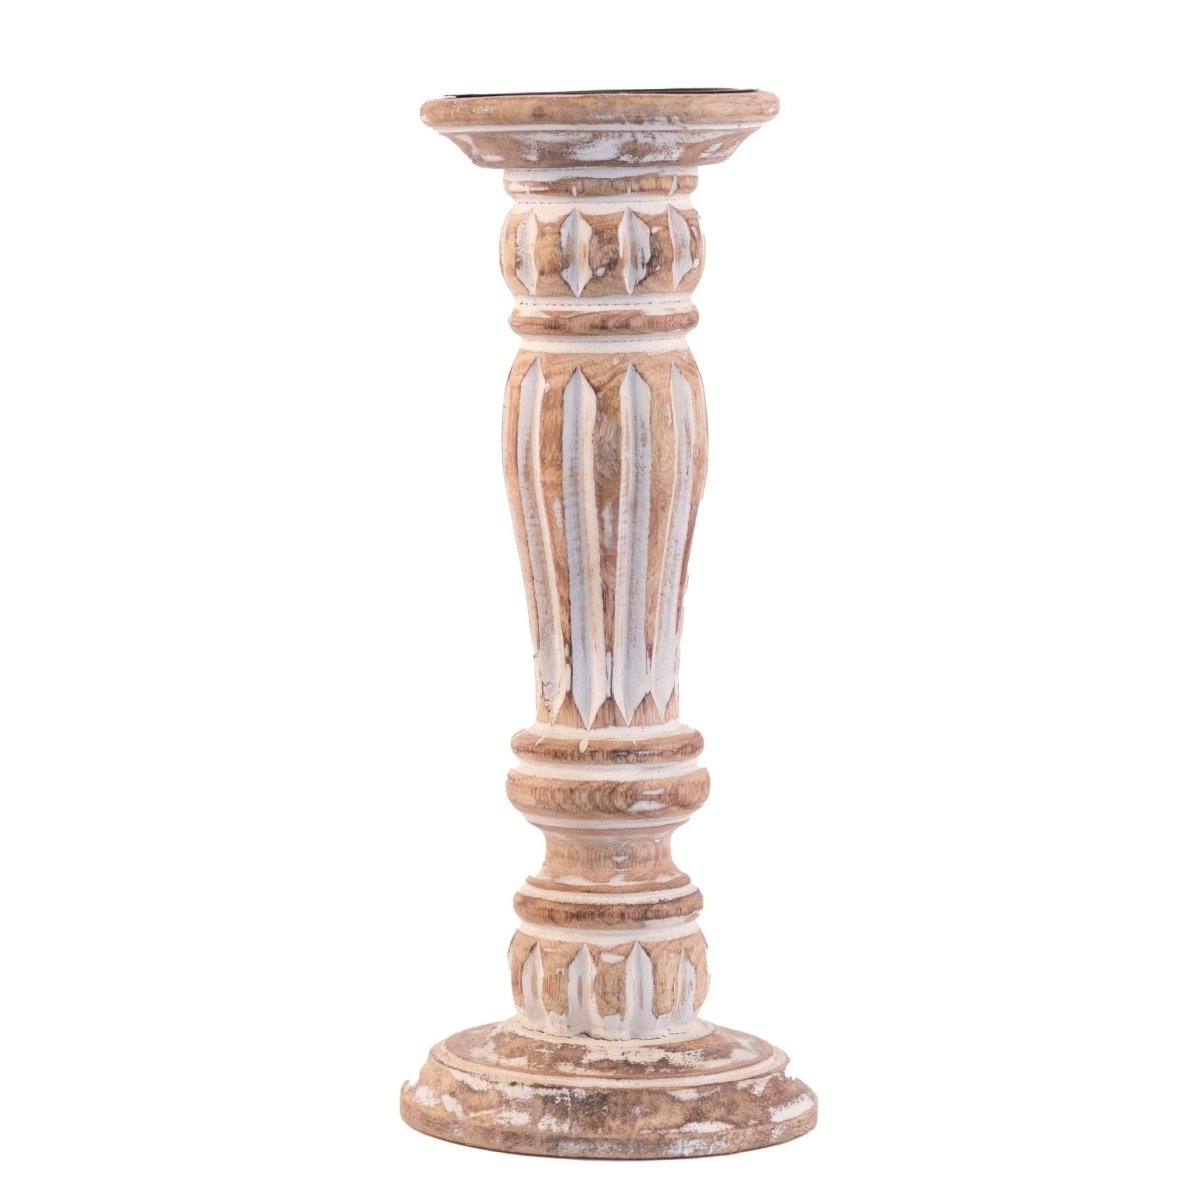 Kezevel Wooden Candle Stand - Artistic 12" H White and Brown Mango Wood Candle Holders for Home Decoration, Room Decoration